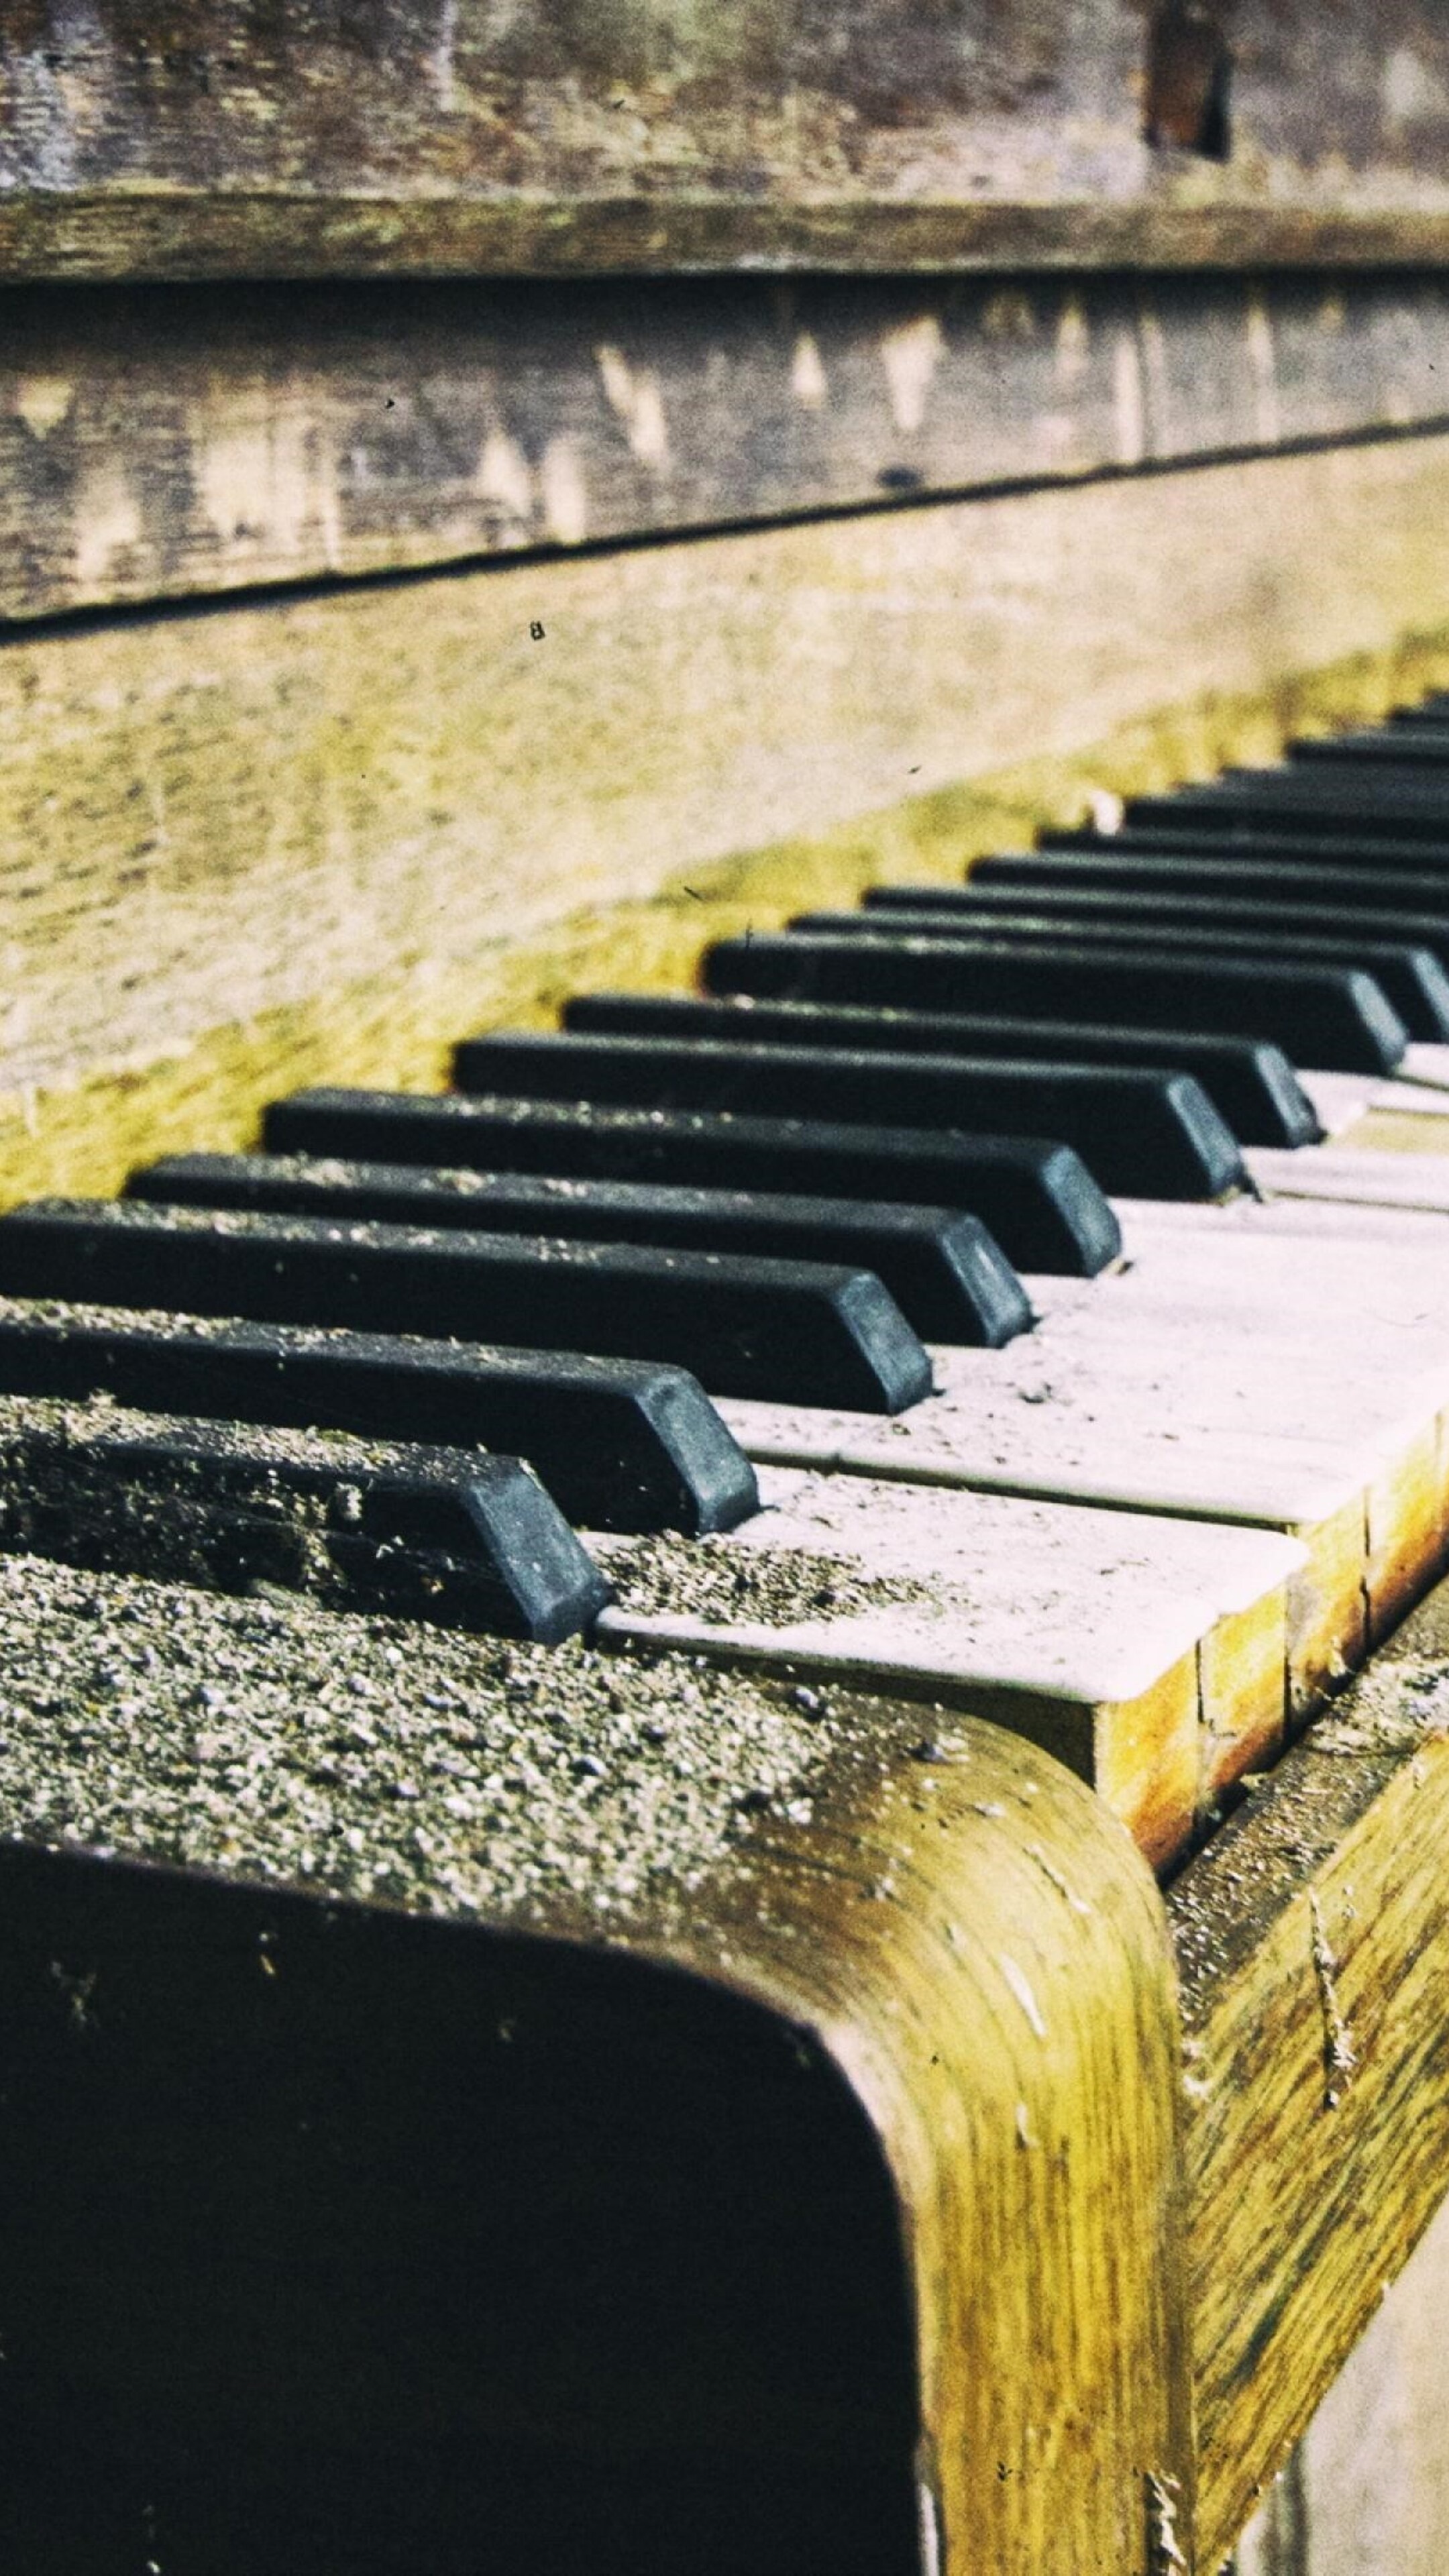 Piano: An Old Stringed Keyboard Instrument, A Row Of Keys. 2160x3840 4K Wallpaper.